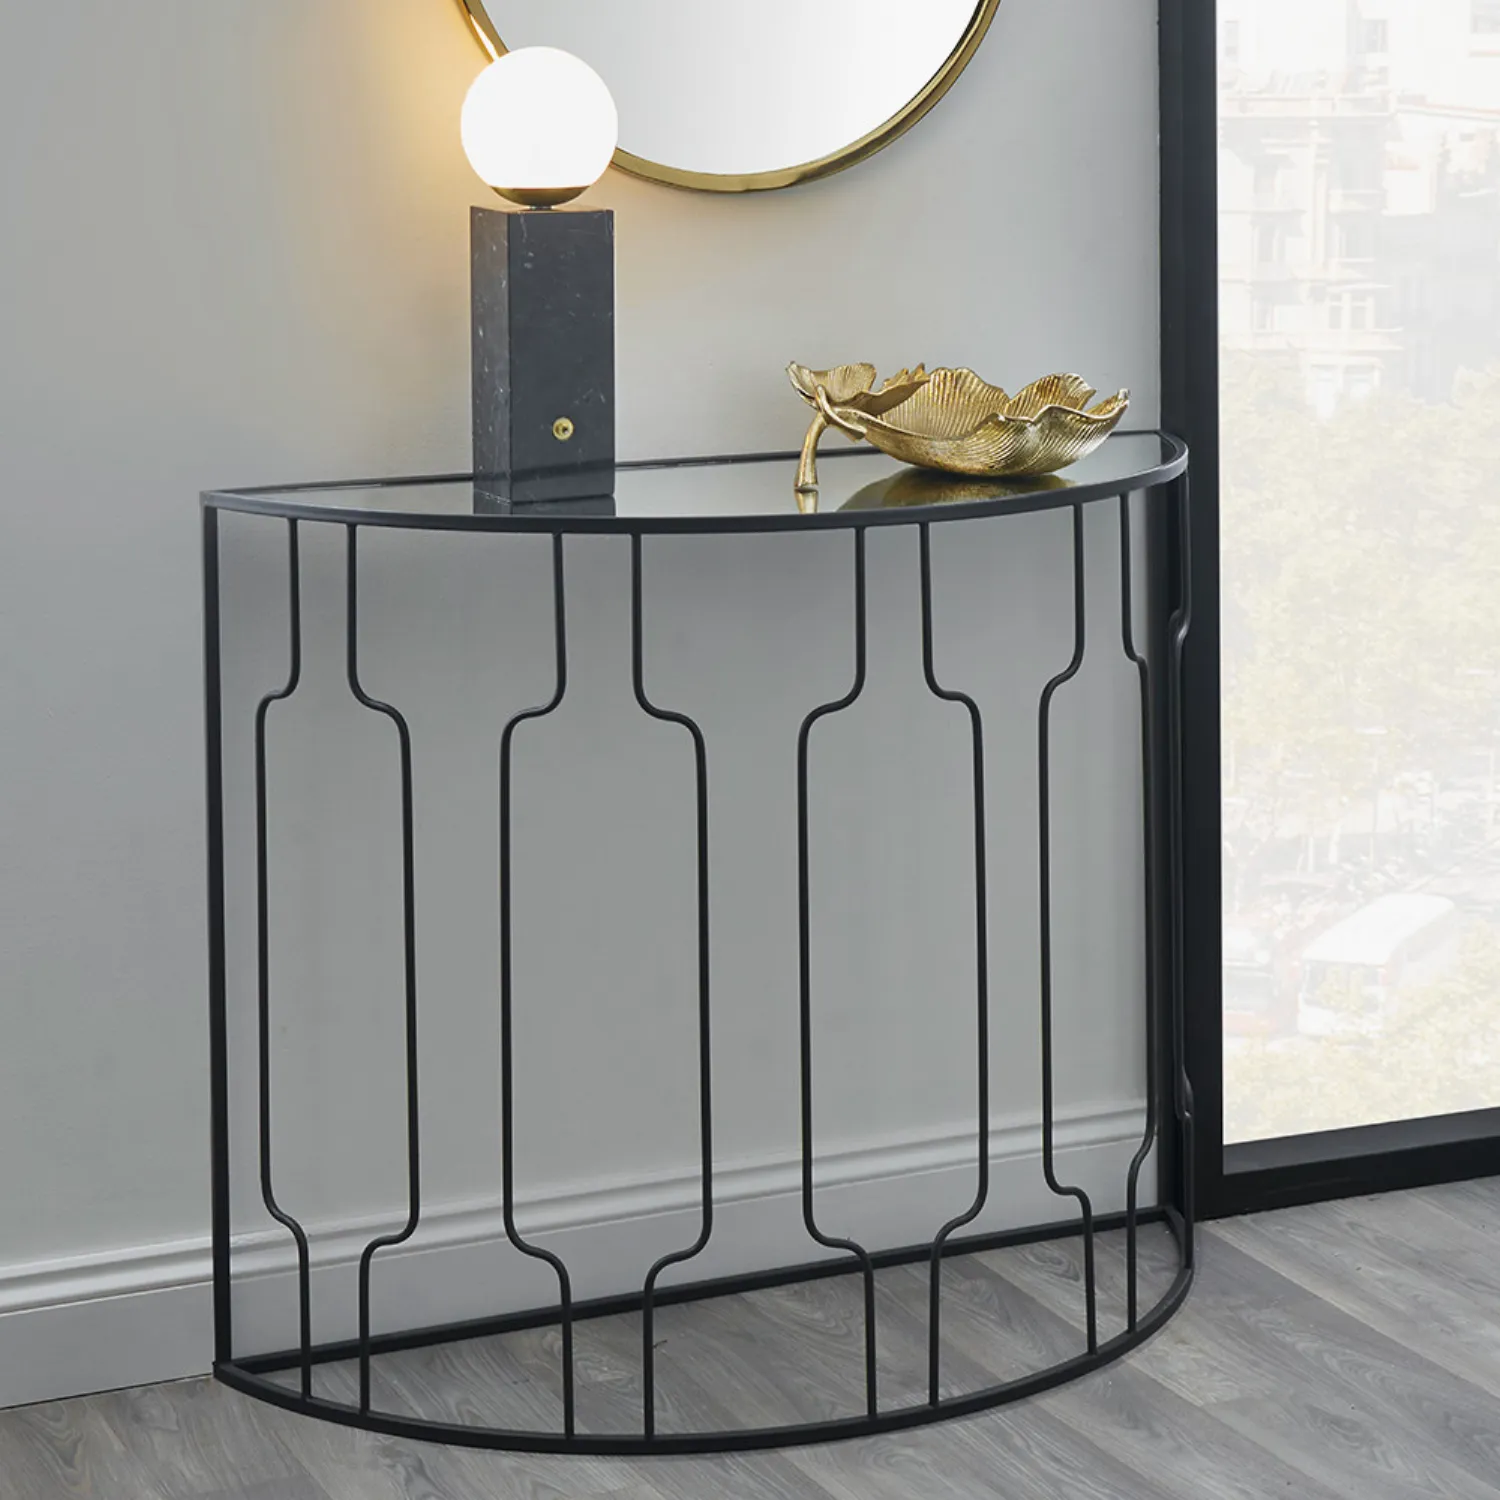 Black Metal Mirrored Glass Half Moon Console Table